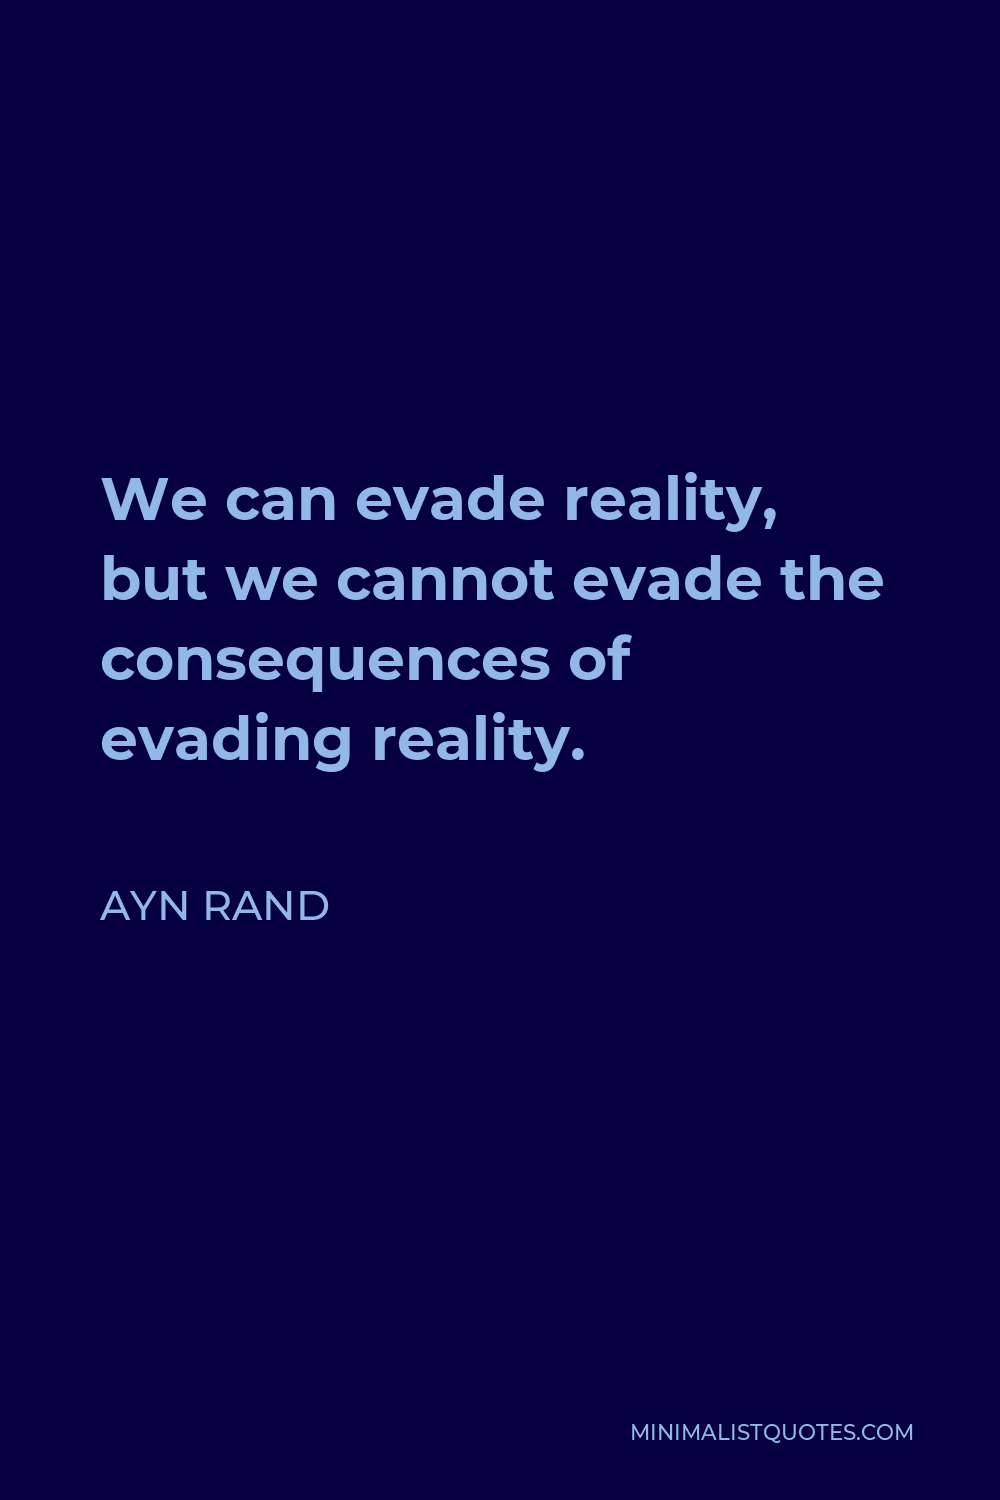 Ayn Rand Quote - We can evade reality, but we cannot evade the consequences of evading reality.